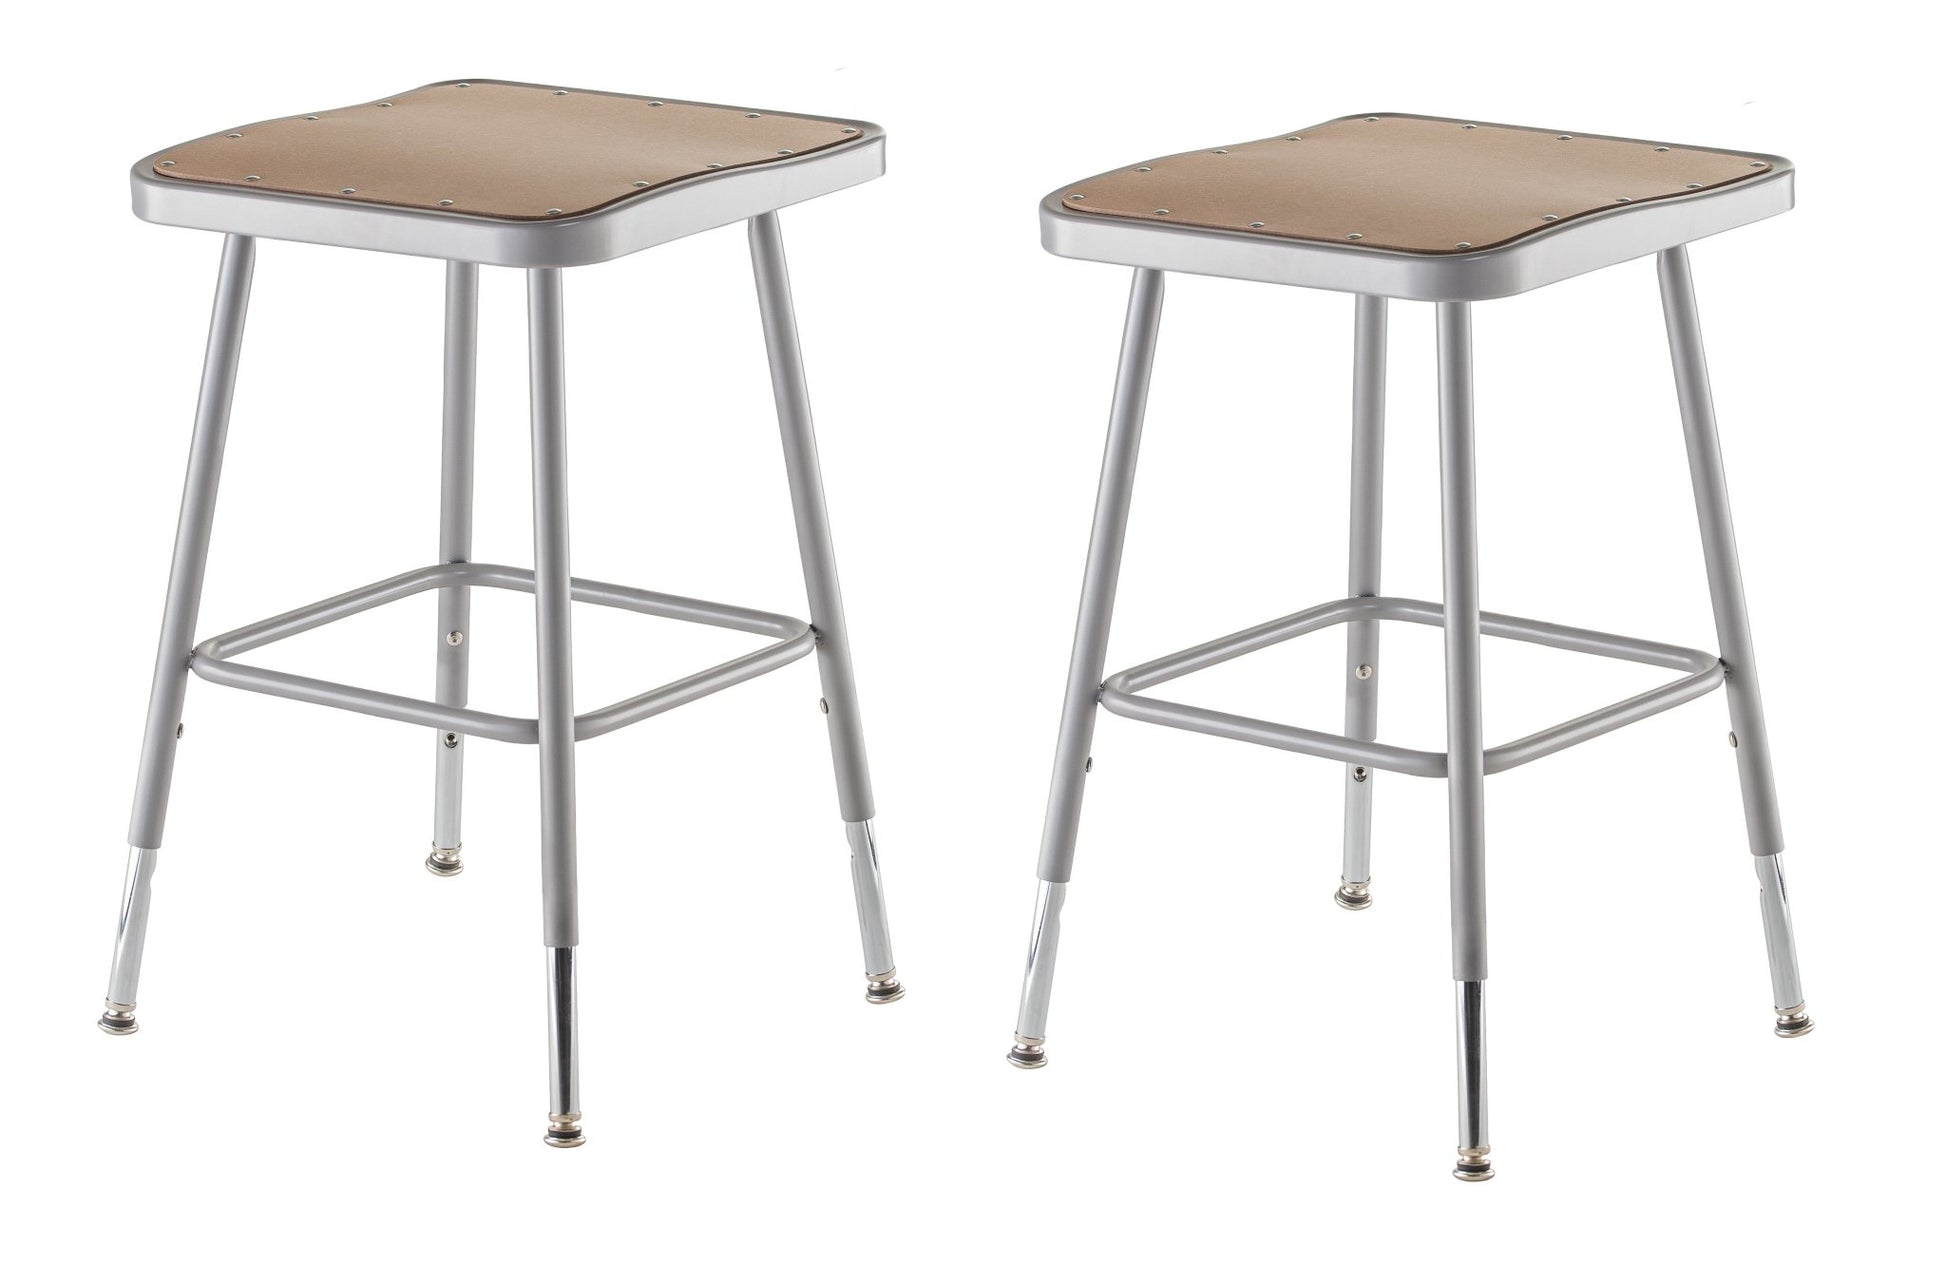 NPS 18" - 26" Height Adjustable Heavy Duty Square Seat Steel Stool with Hardboard Seat (National Public Seating NPS-6318H) - SchoolOutlet